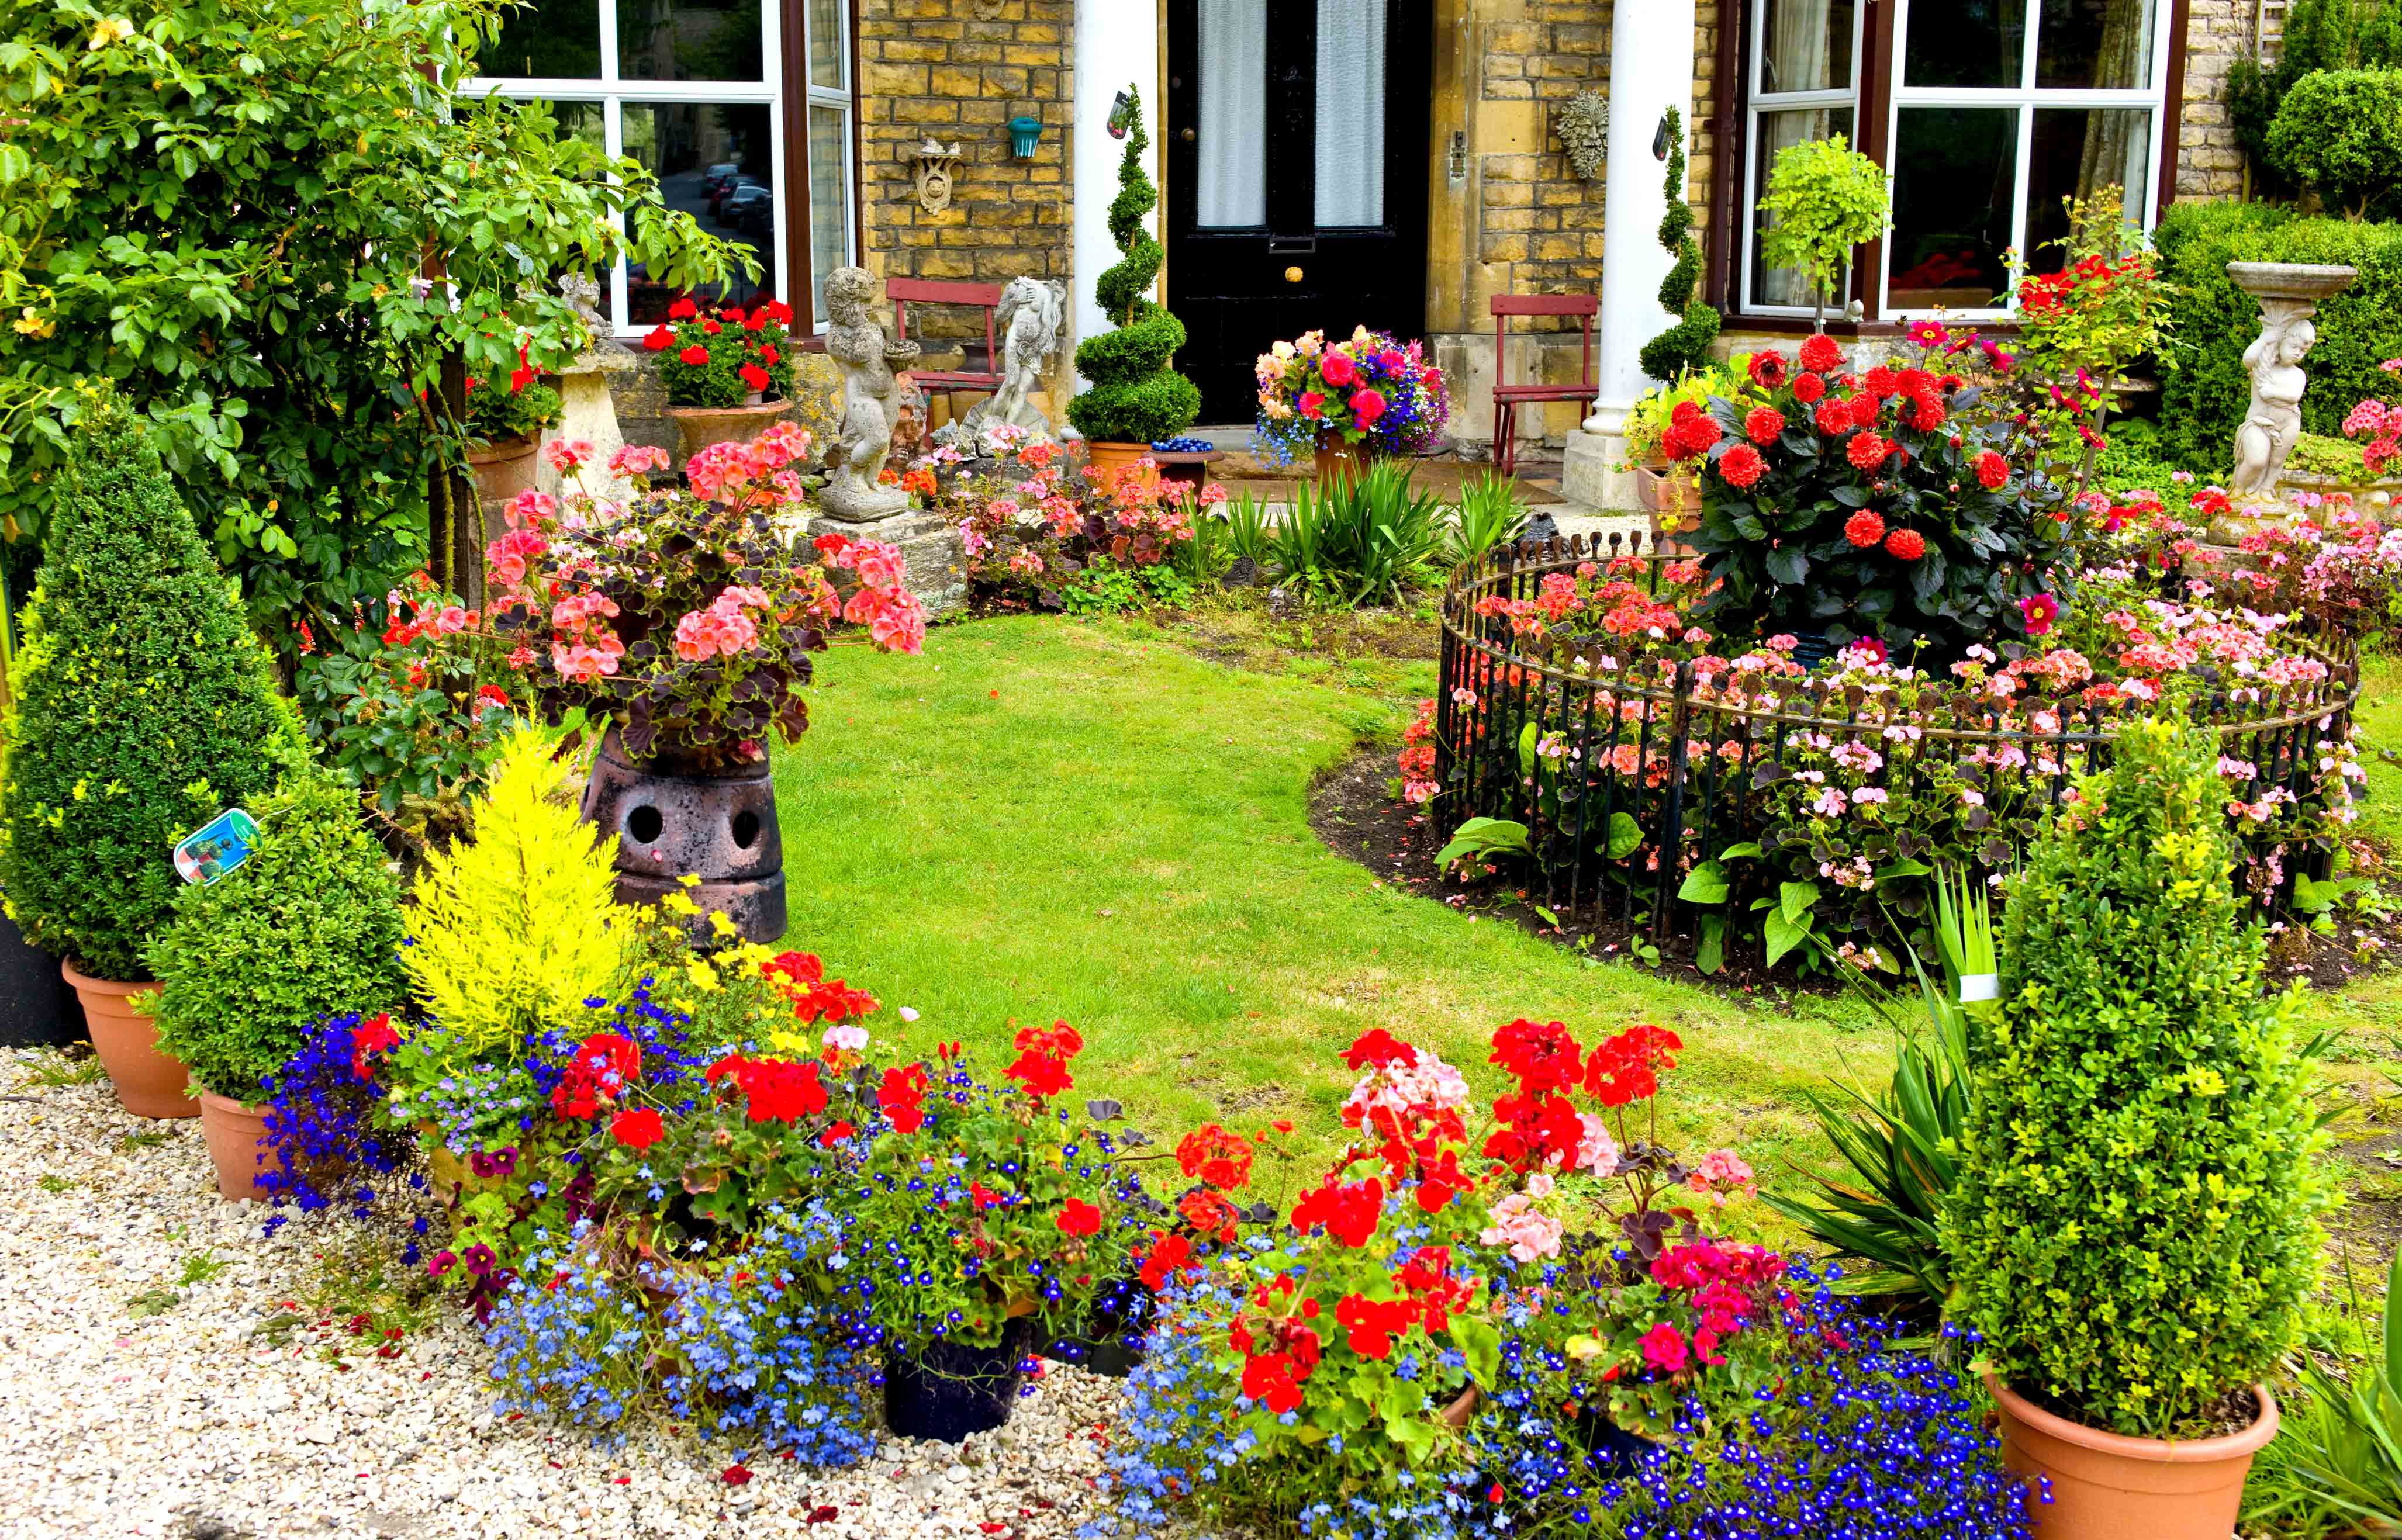 English Country Garden Images From Around The World Pixel By Pixel